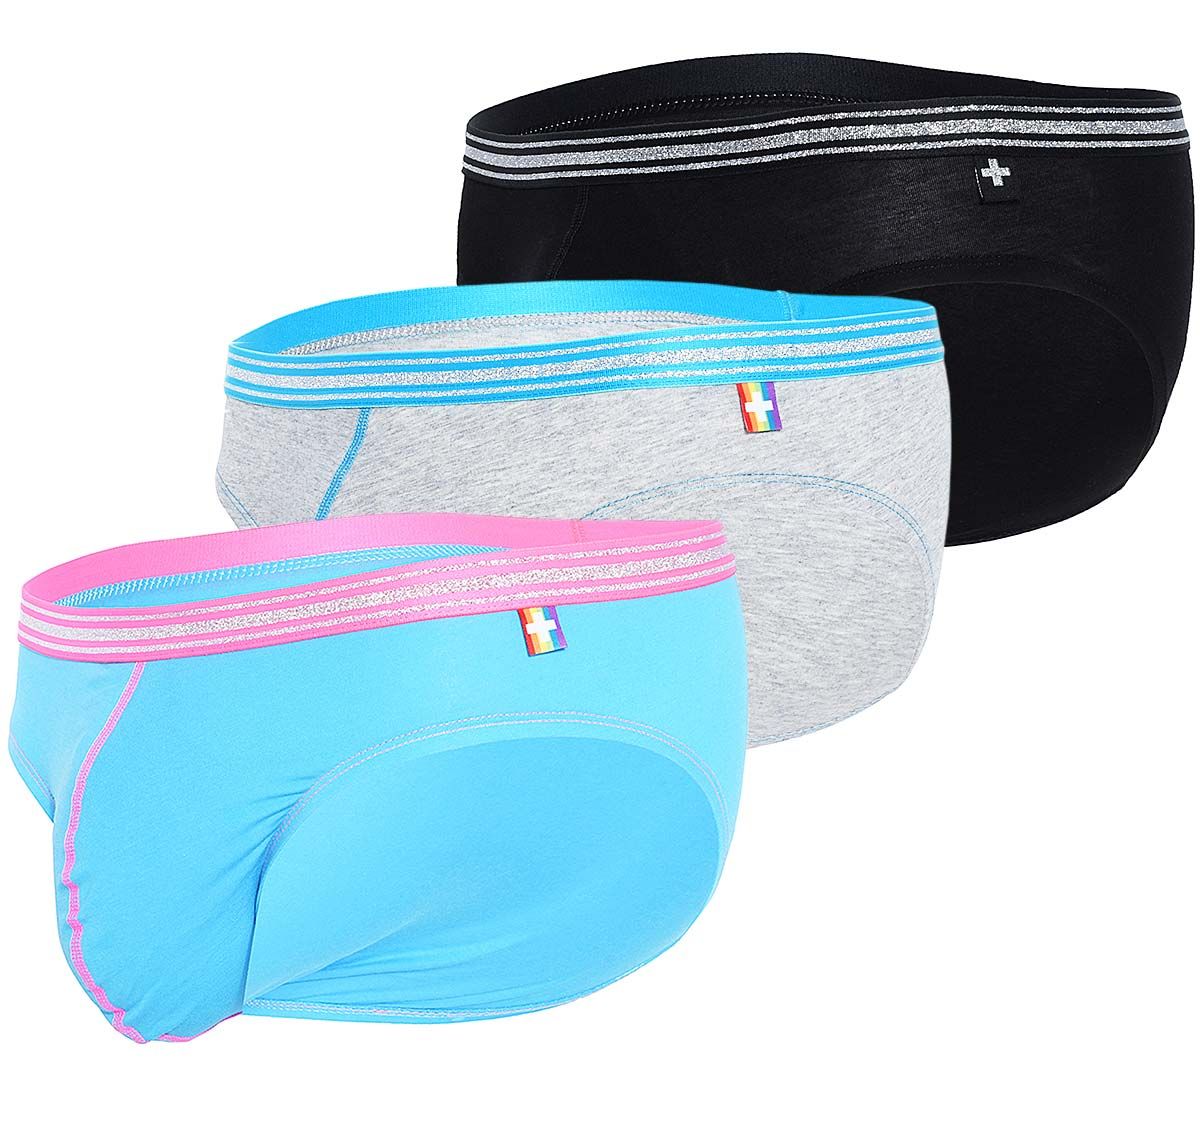 Andrew Christian 3 Pack Briefs BOY BRIEF UNICORN 3-PACK w/Almost Naked 91440, black/blue/grey